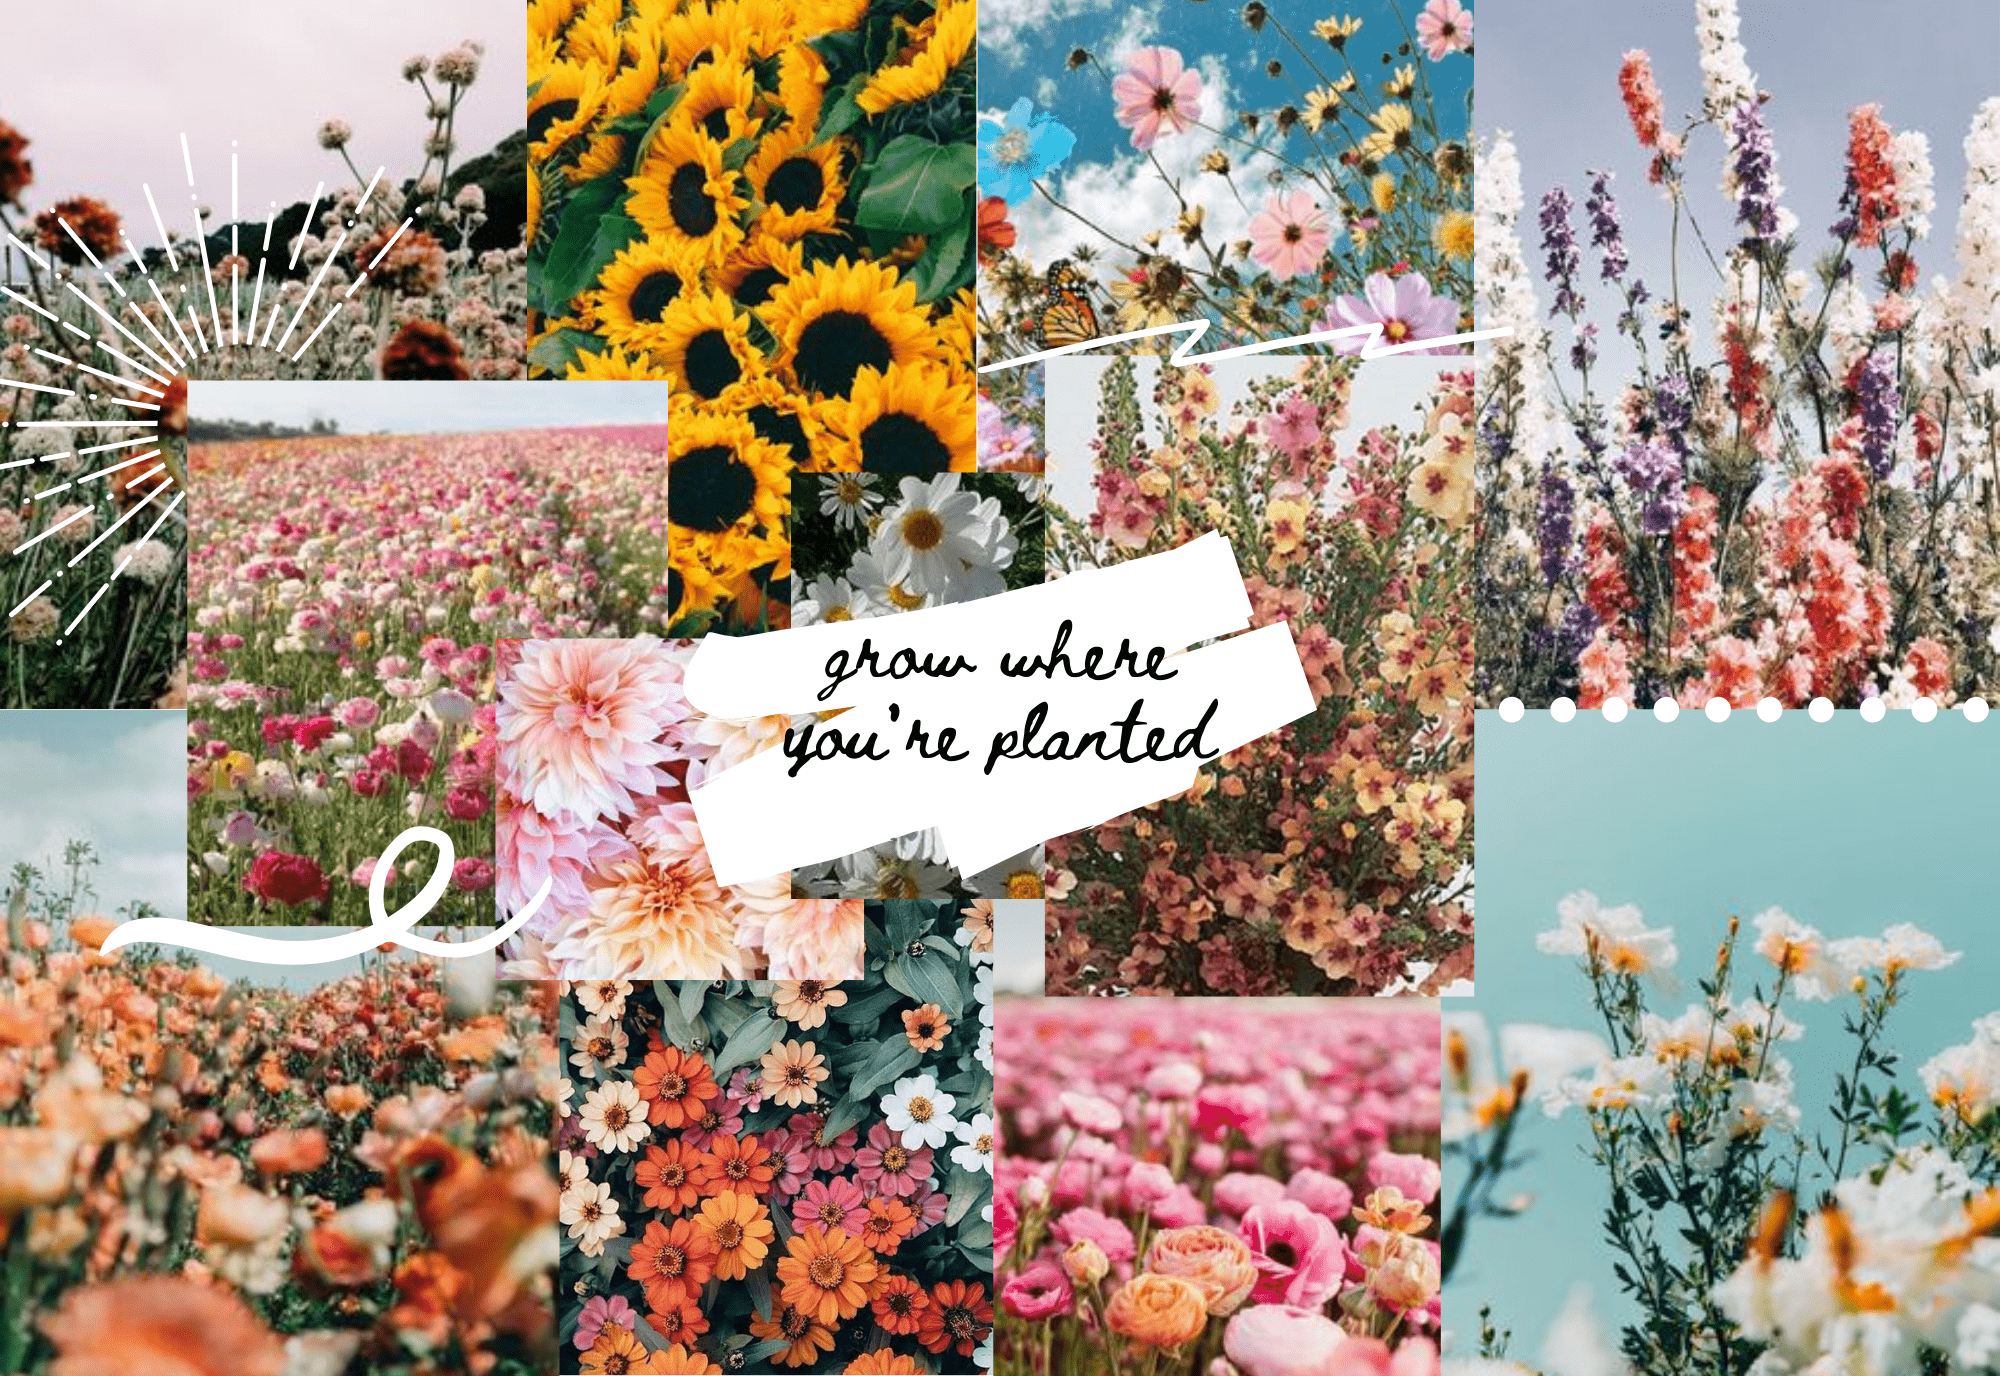 A collage of flowers with a quote that says 